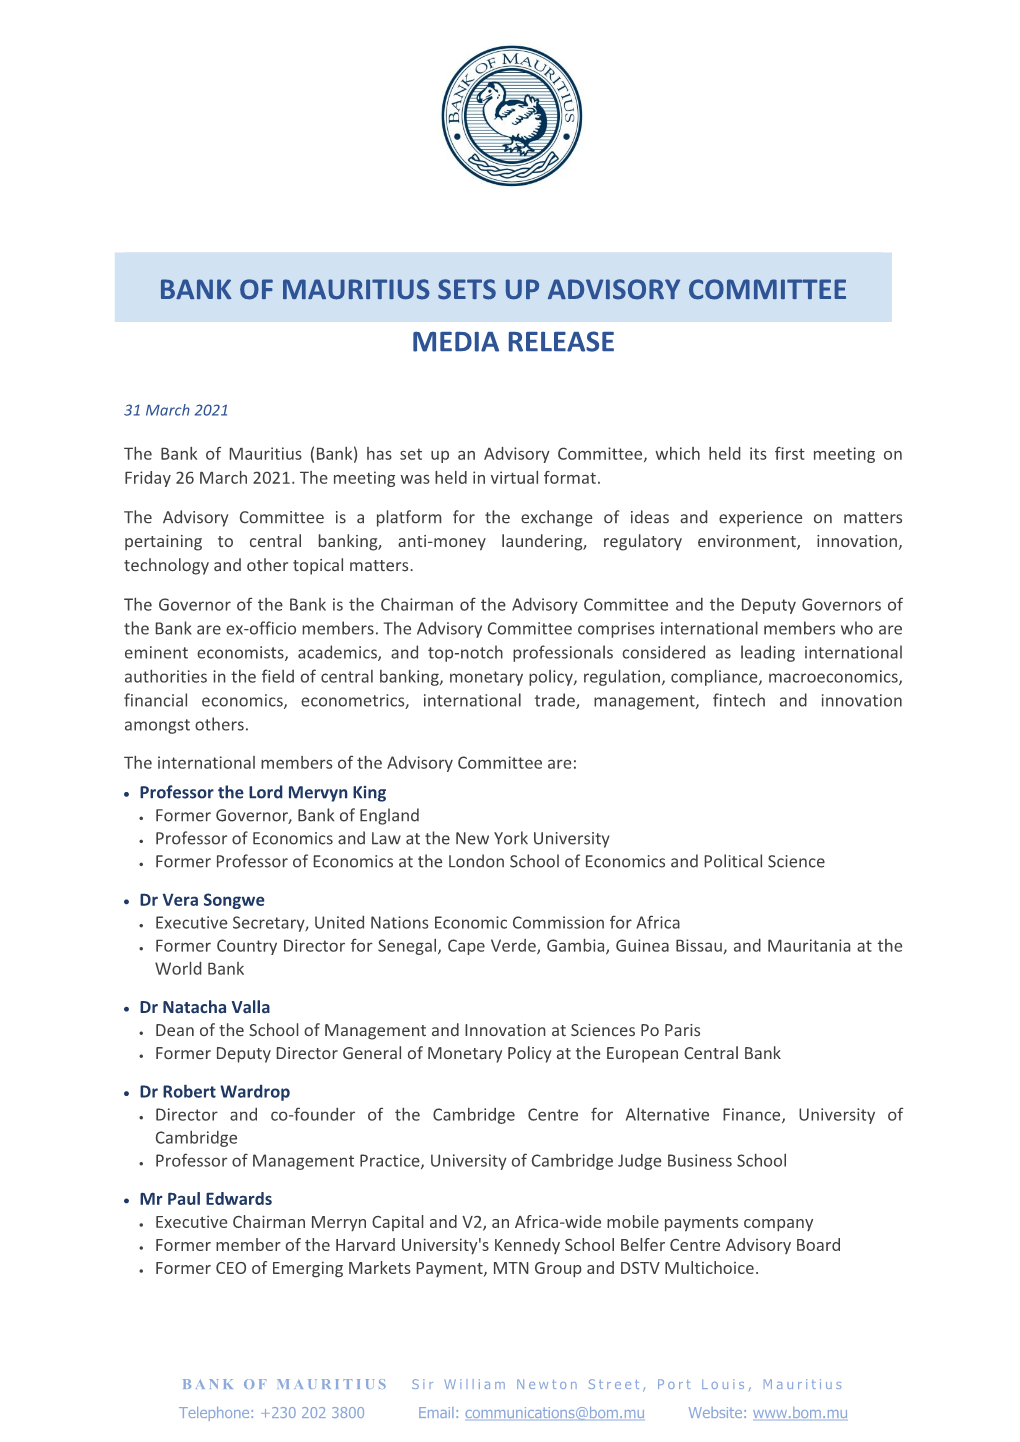 Bank of Mauritius Sets up Advisory Committee Media Release